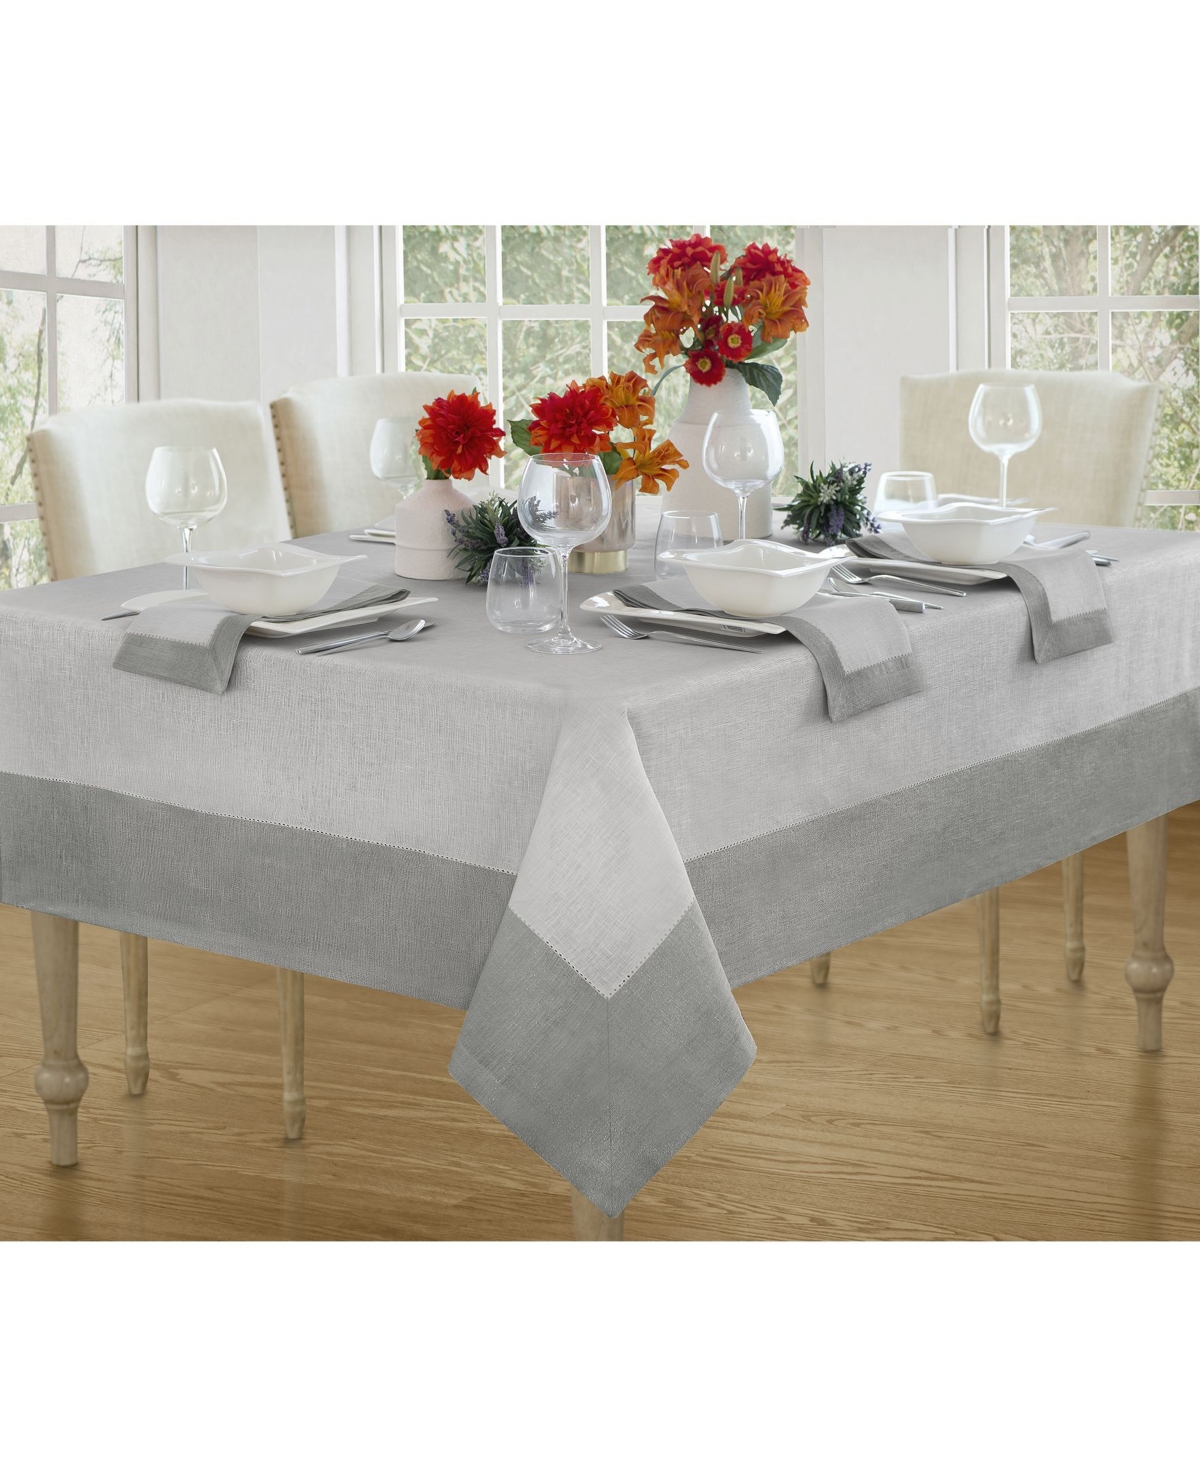 Villeroy & Boch New Wave Metallic Border Linen Tablecloth, 90" Round In White,silver